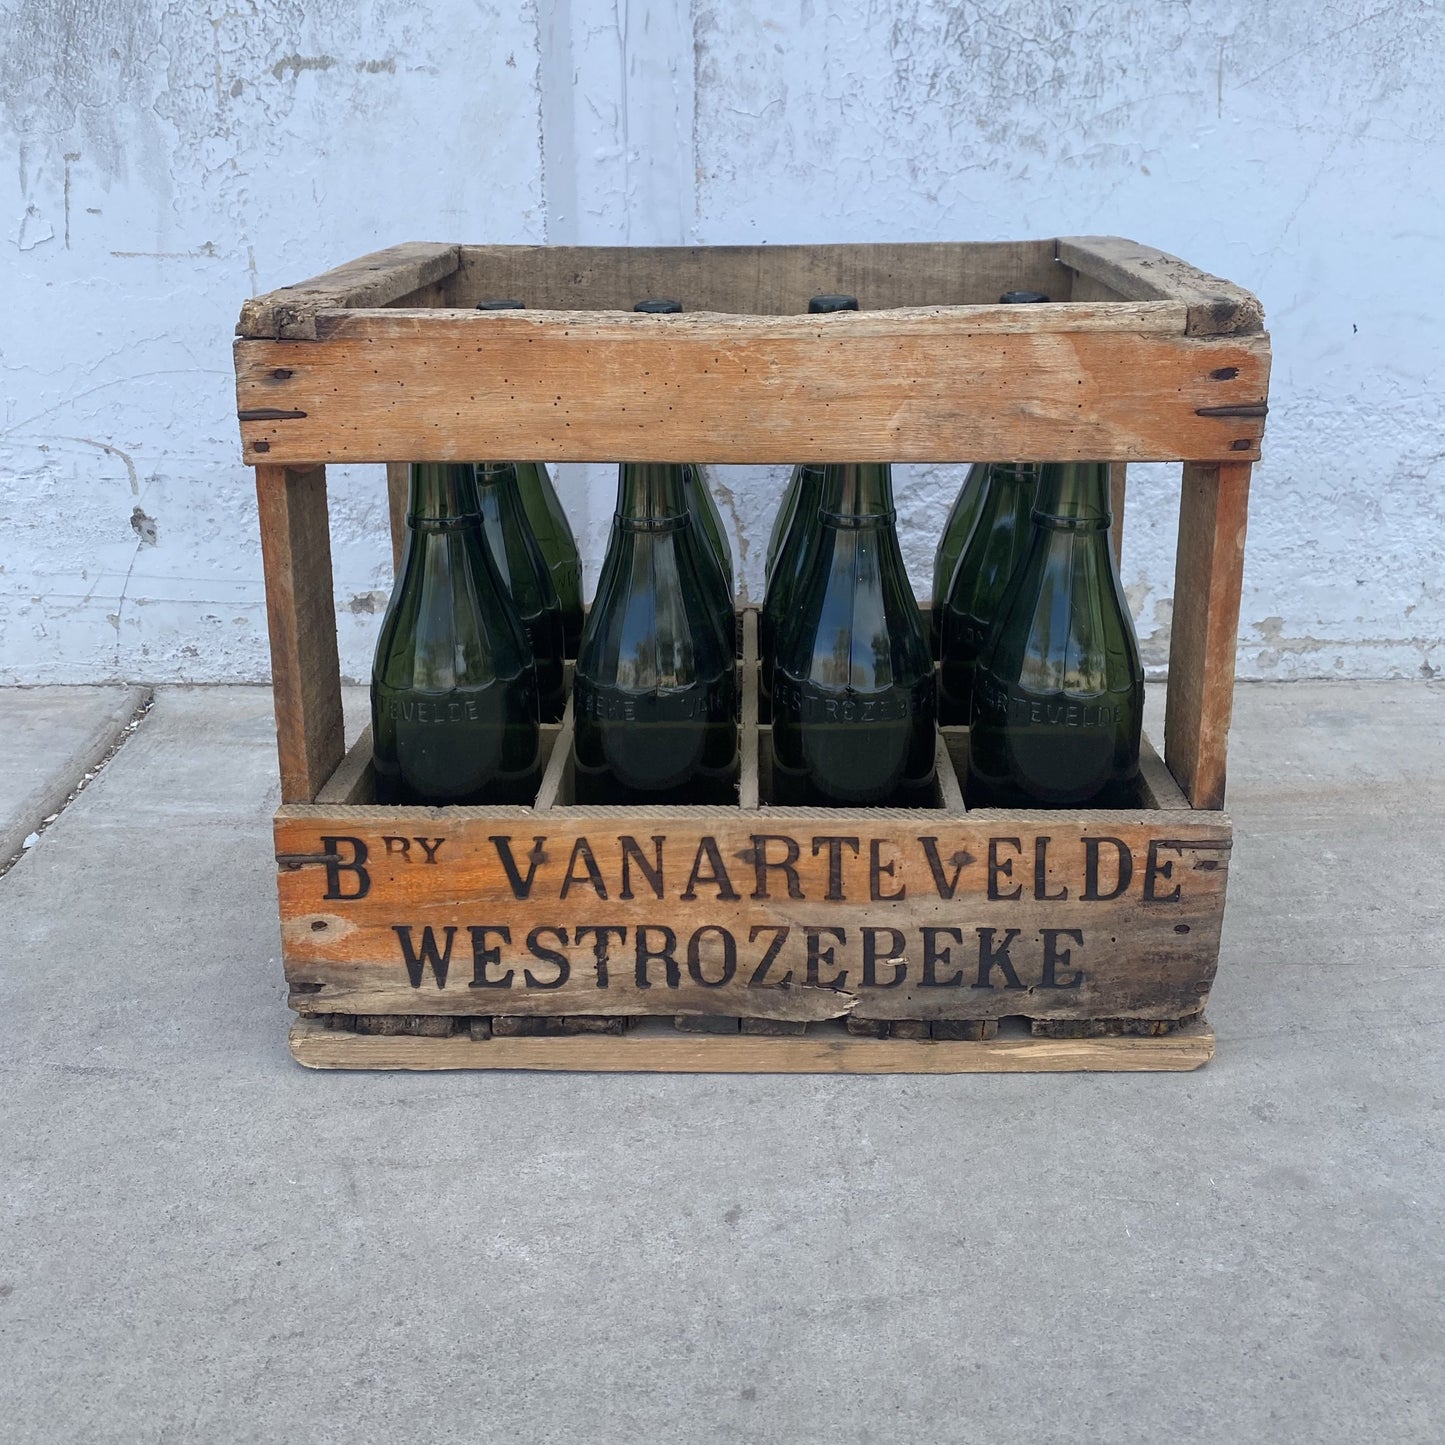 Wood Crate with Bottles